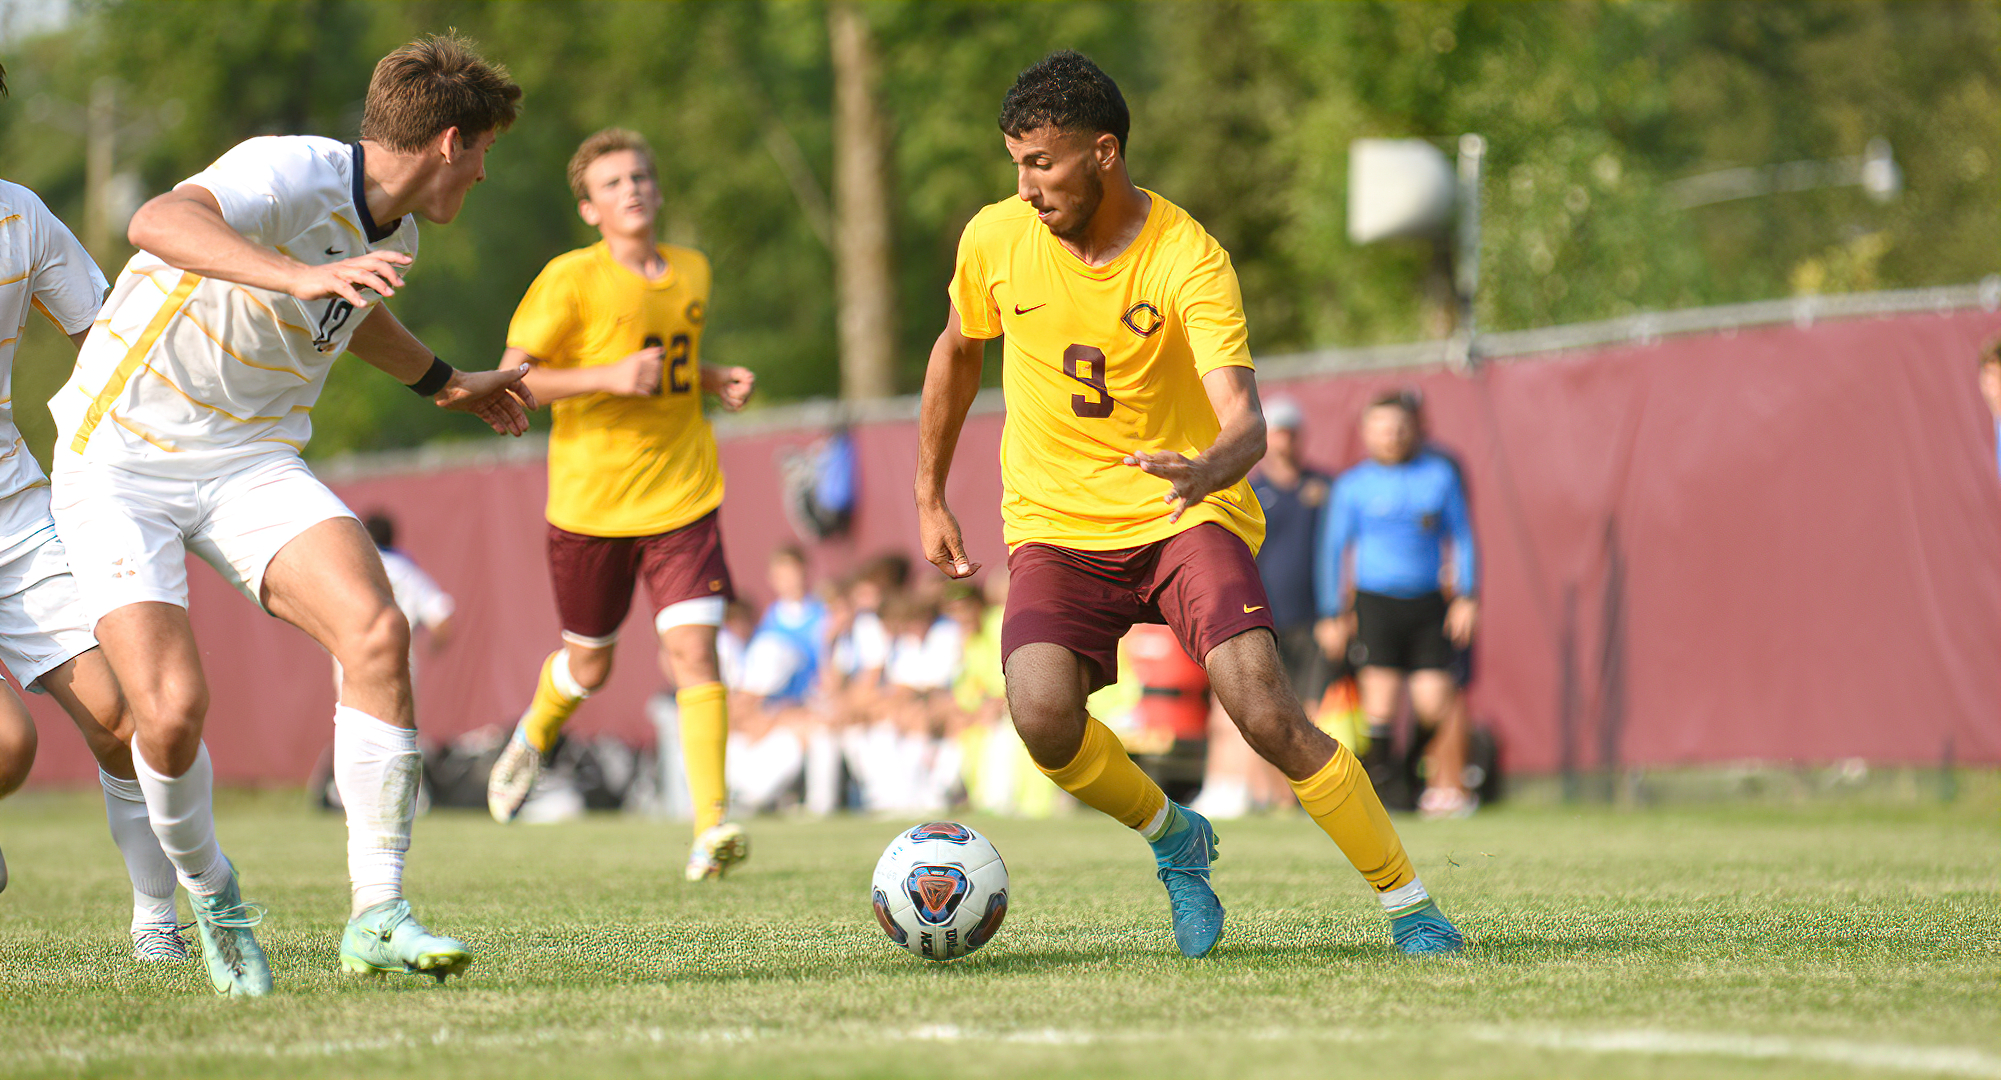 Sophomore Albara Mutleq had a pair of goals in the Cobbers' 5-1 win at Finlandia. He now has four on the year which is third most for CC.